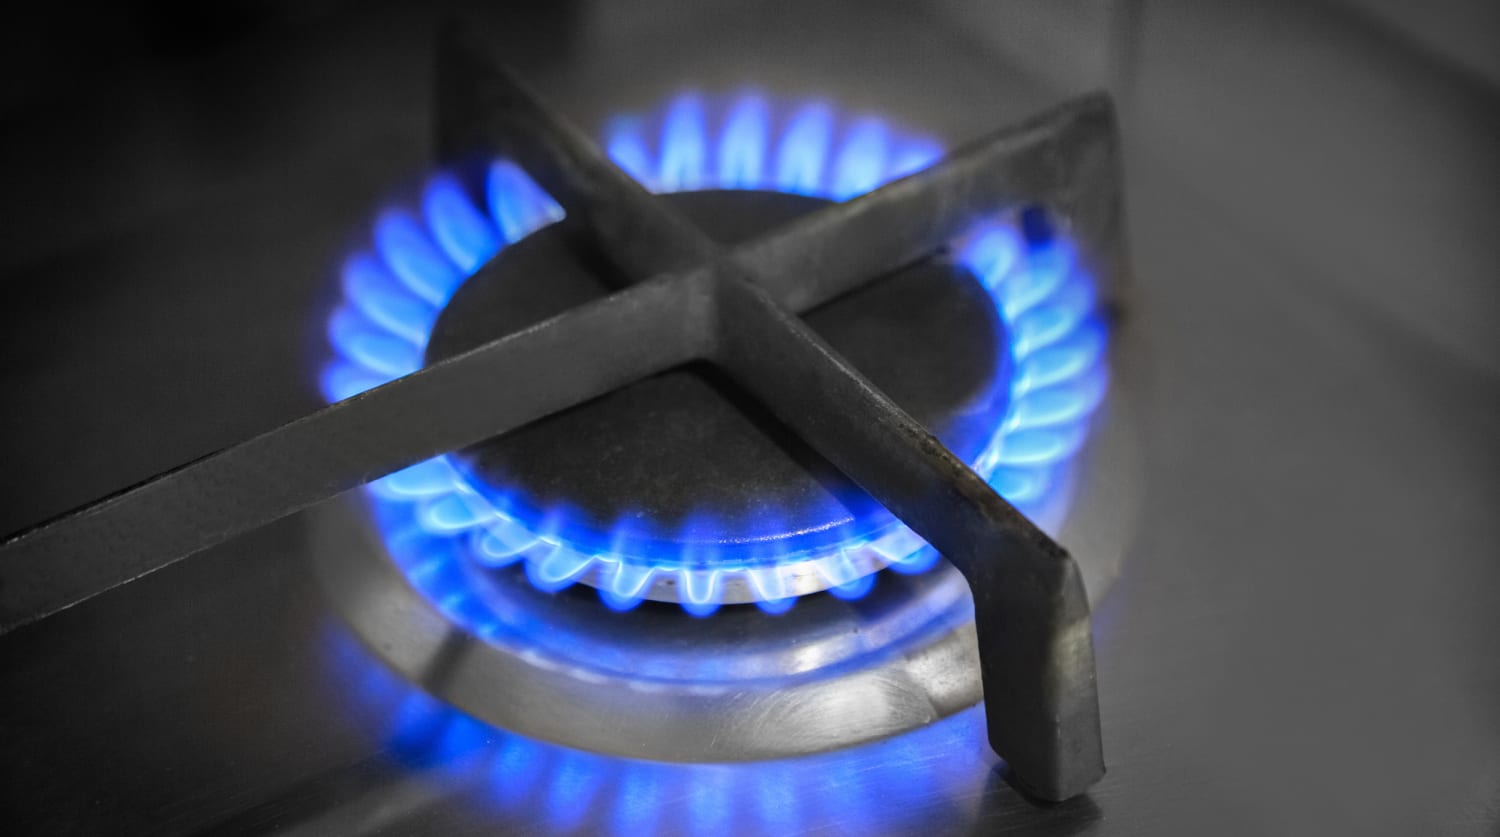 Report Shows Electric Stoves Are More Dangerous Than Gas